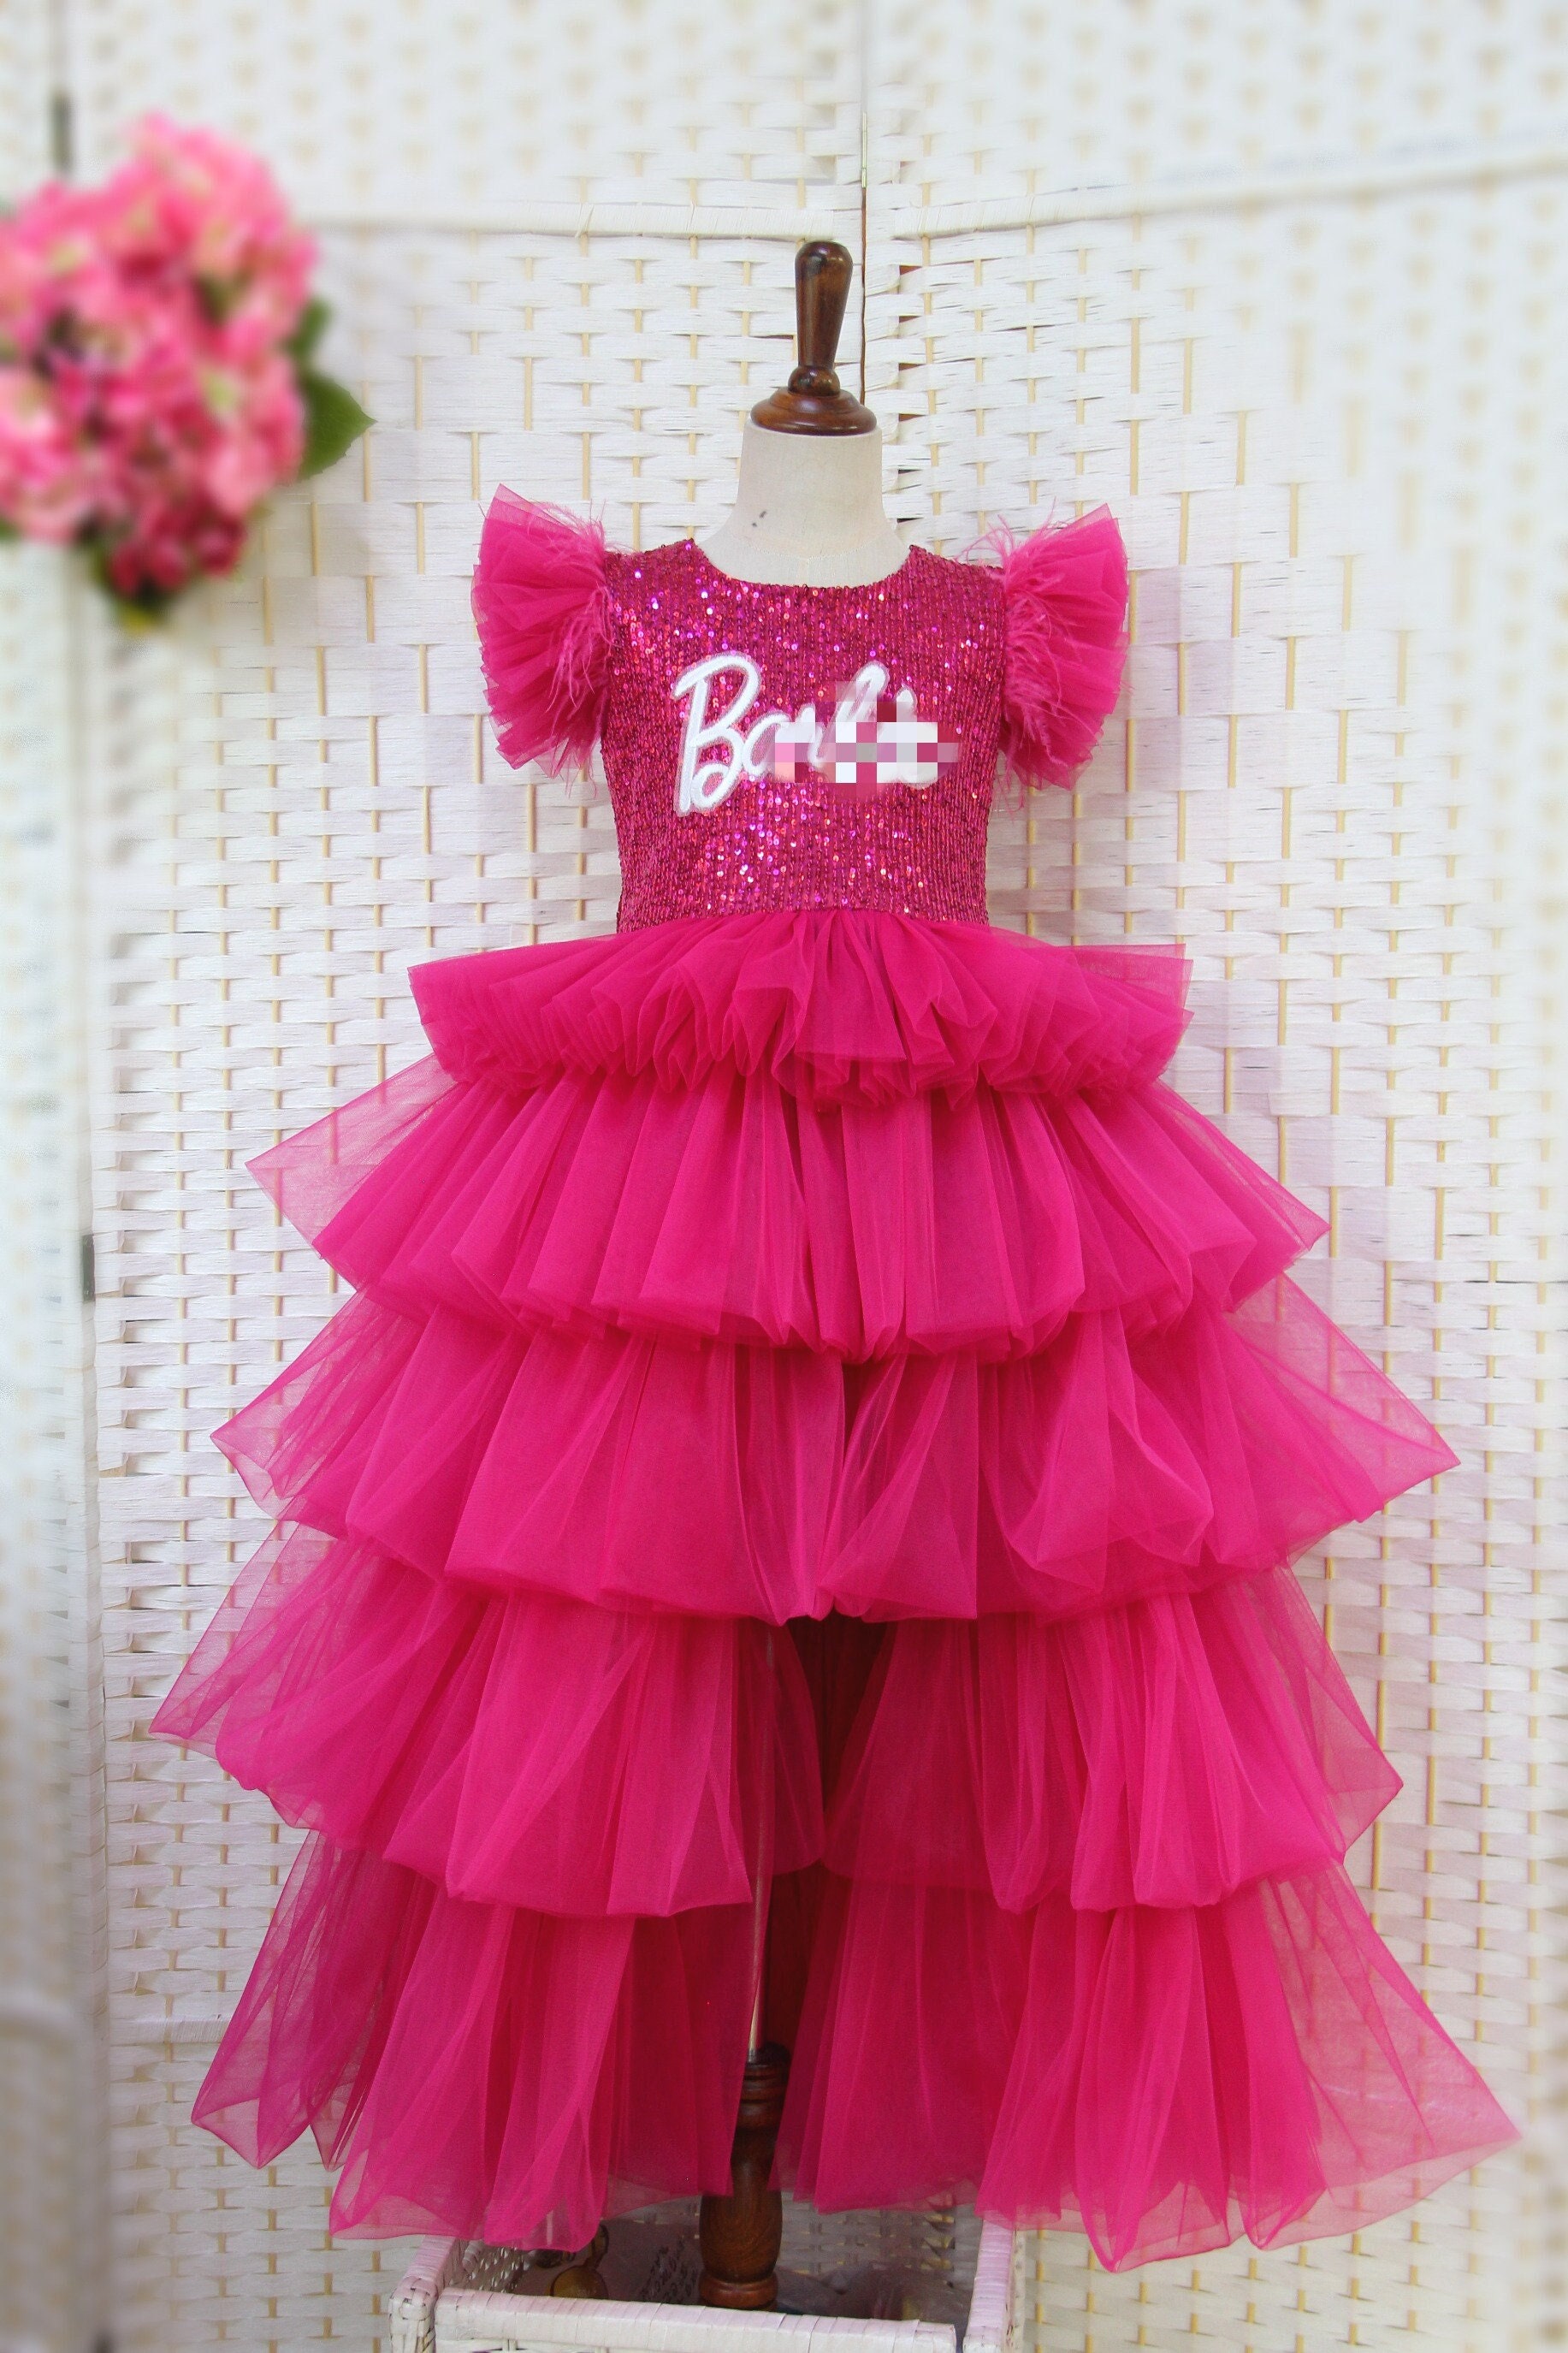 Pink Dotted Polka Party Dress For Barbie Doll Clothes High Quality Evening  Gown Miniature Kids Toy 1/6 Doll Accessories - Dolls Accessories -  AliExpress